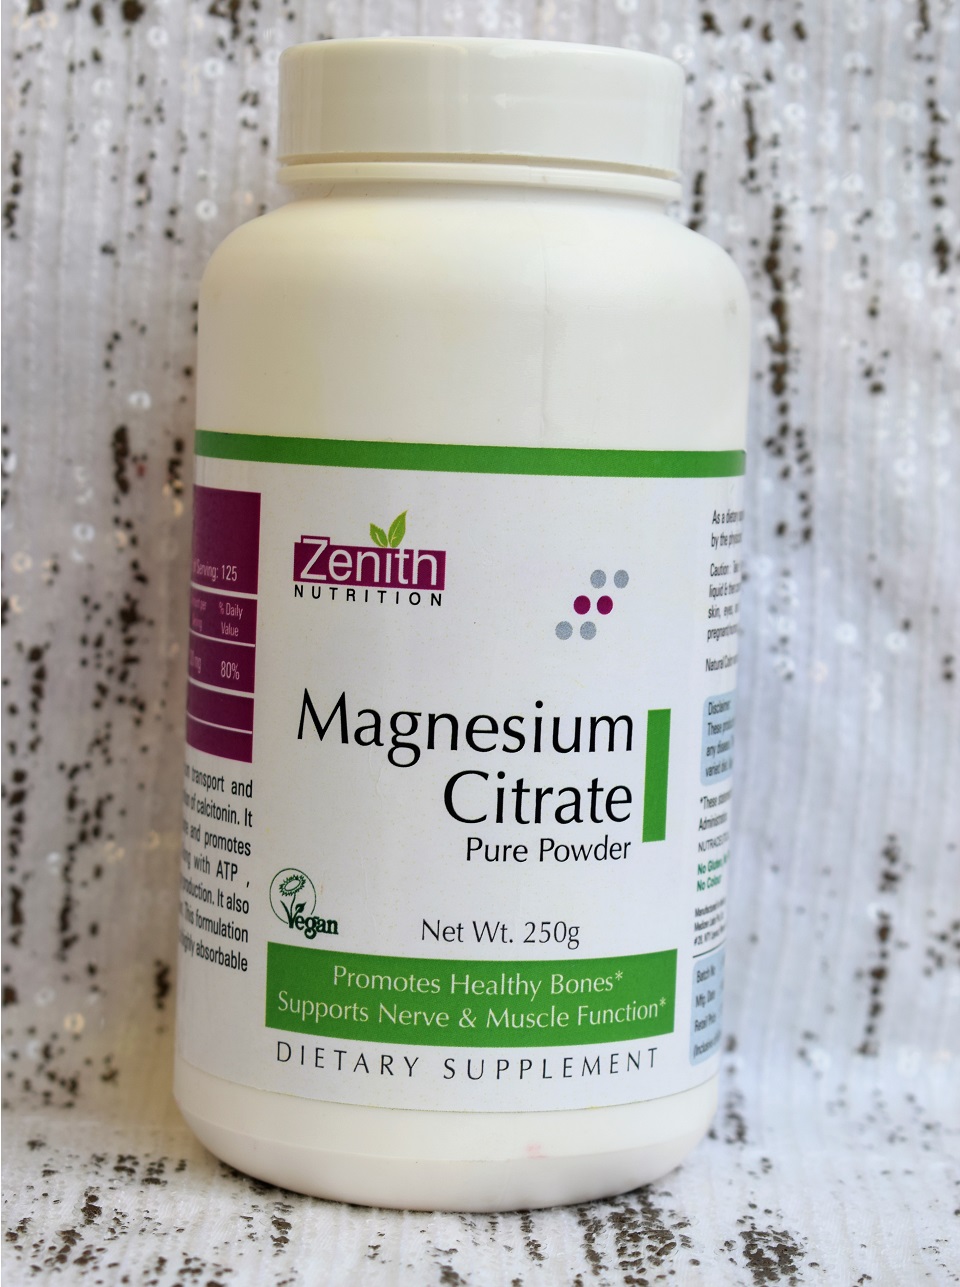 Zenith Nutrition Magnesium Citrate Pure Powder